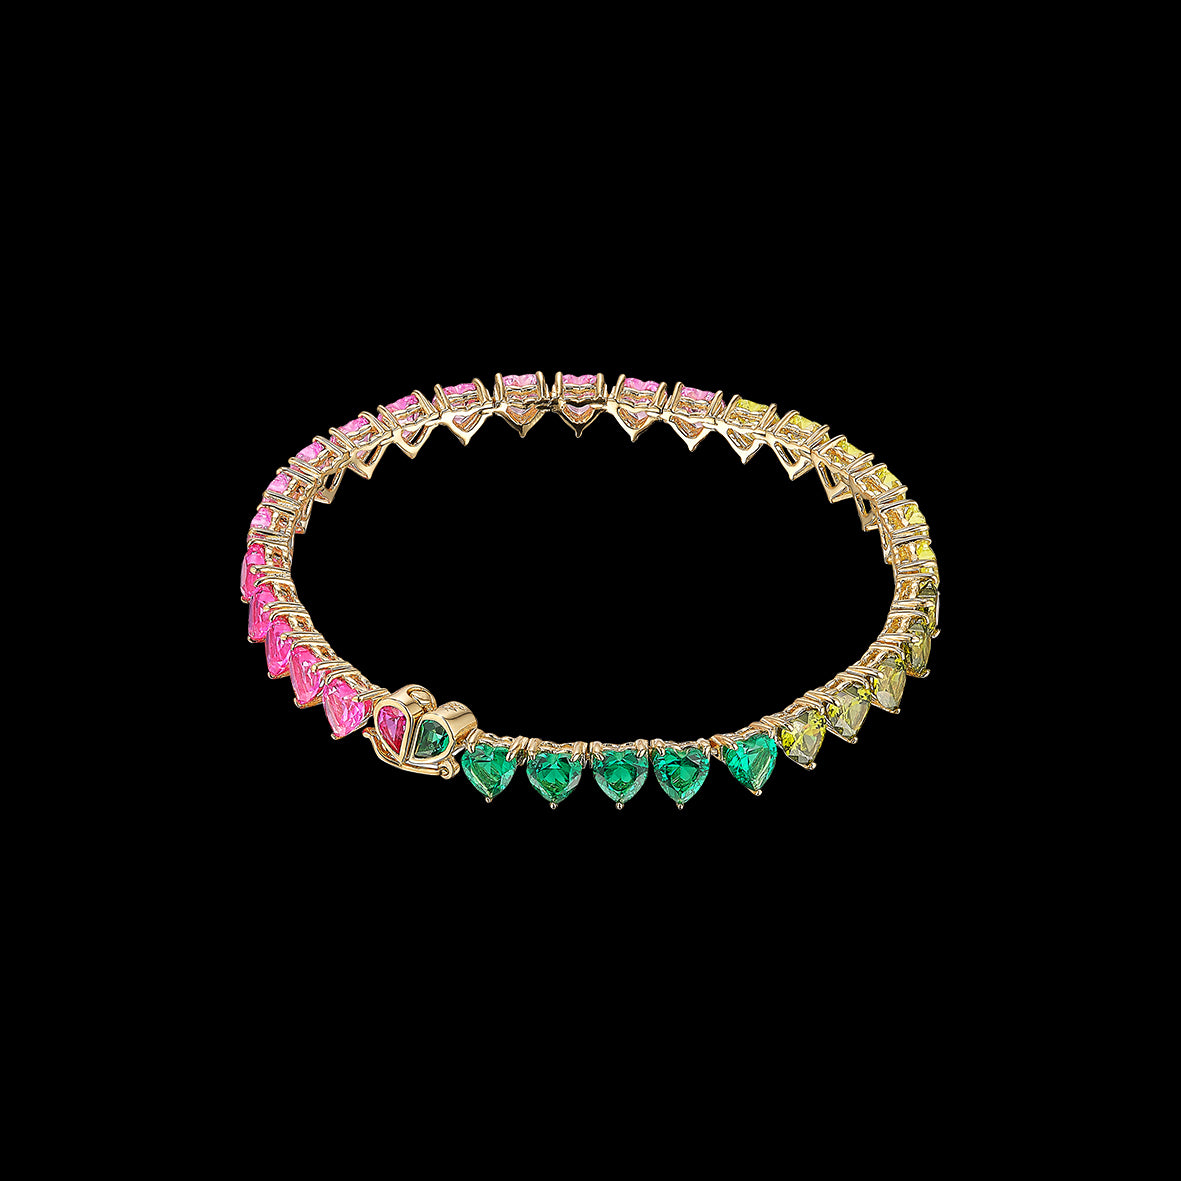 Peony Eternity Heart Bracelet, Bracelet, Anabela Chan Joaillerie - Fine jewelry with laboratory grown and created gemstones hand-crafted in the United Kingdom. Anabela Chan Joaillerie is the first fine jewellery brand in the world to champion laboratory-grown and created gemstones with high jewellery design, artisanal craftsmanship and a focus on ethical and sustainable innovations.